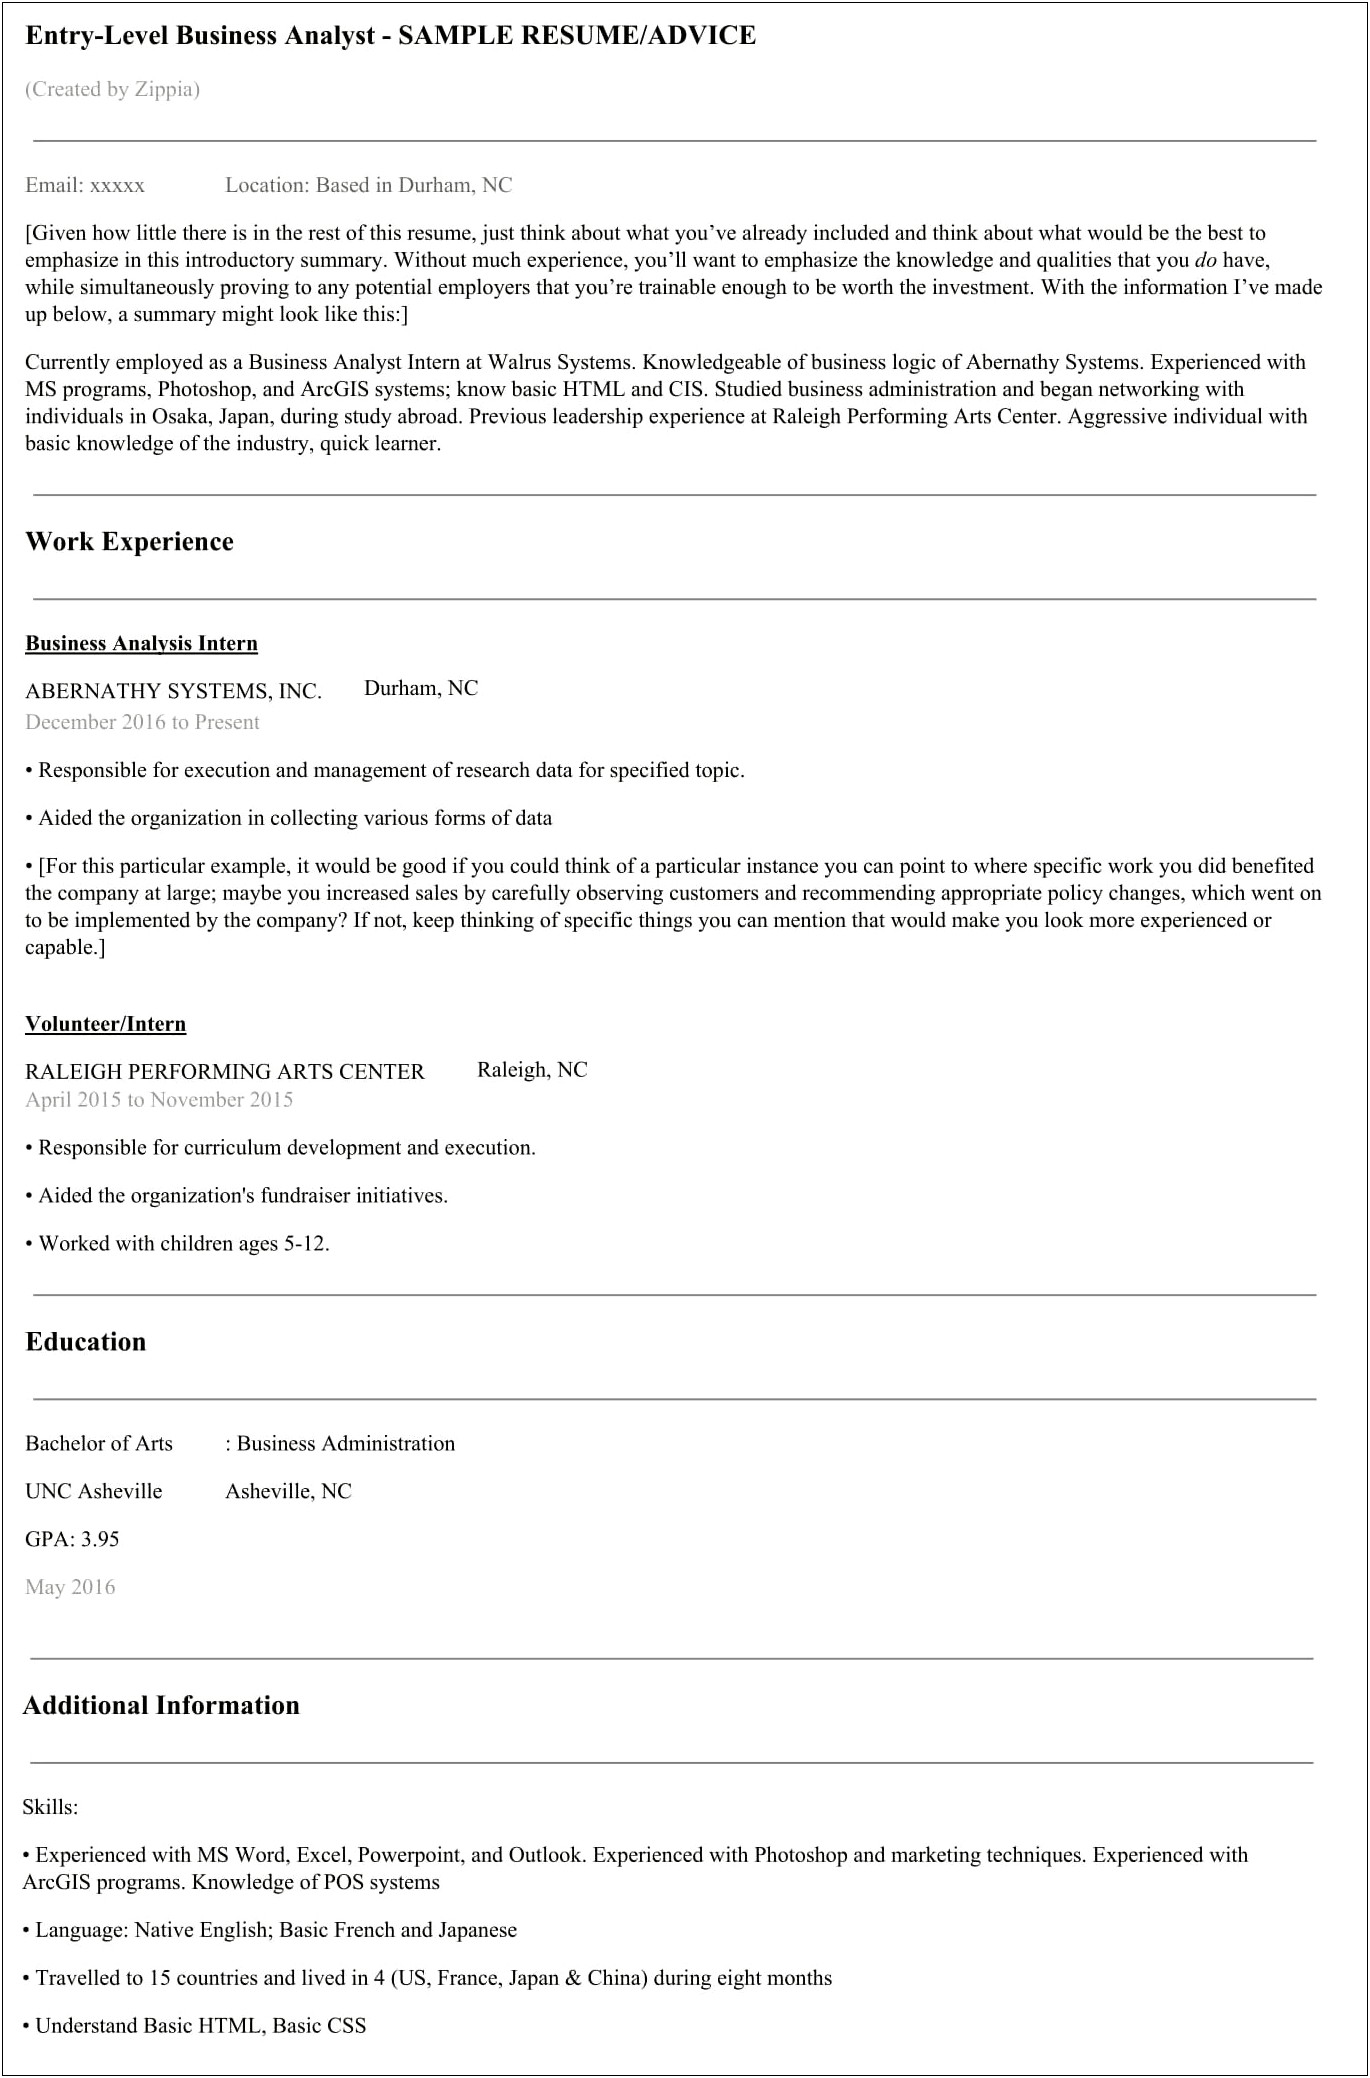 Creating A General Resume Objective